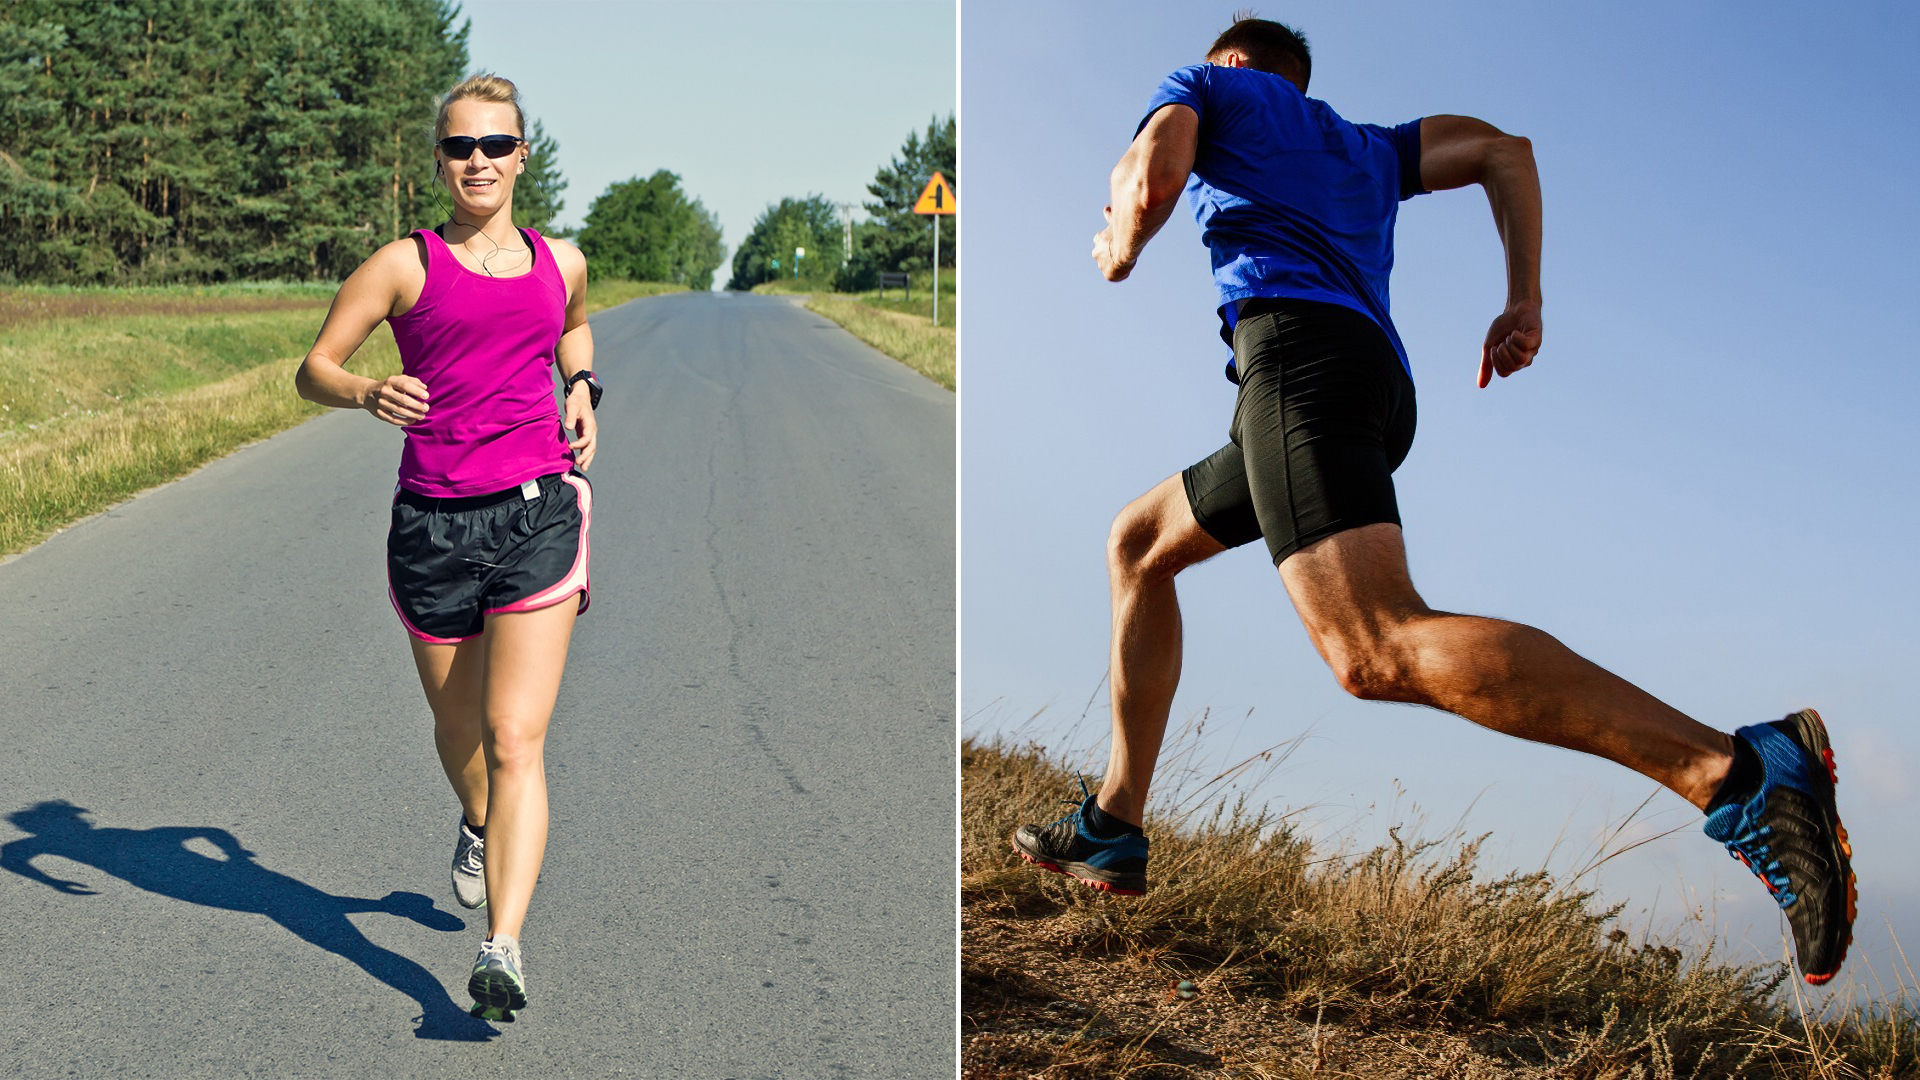 Walking vs Running: The Pros and Cons of Each as a Form of